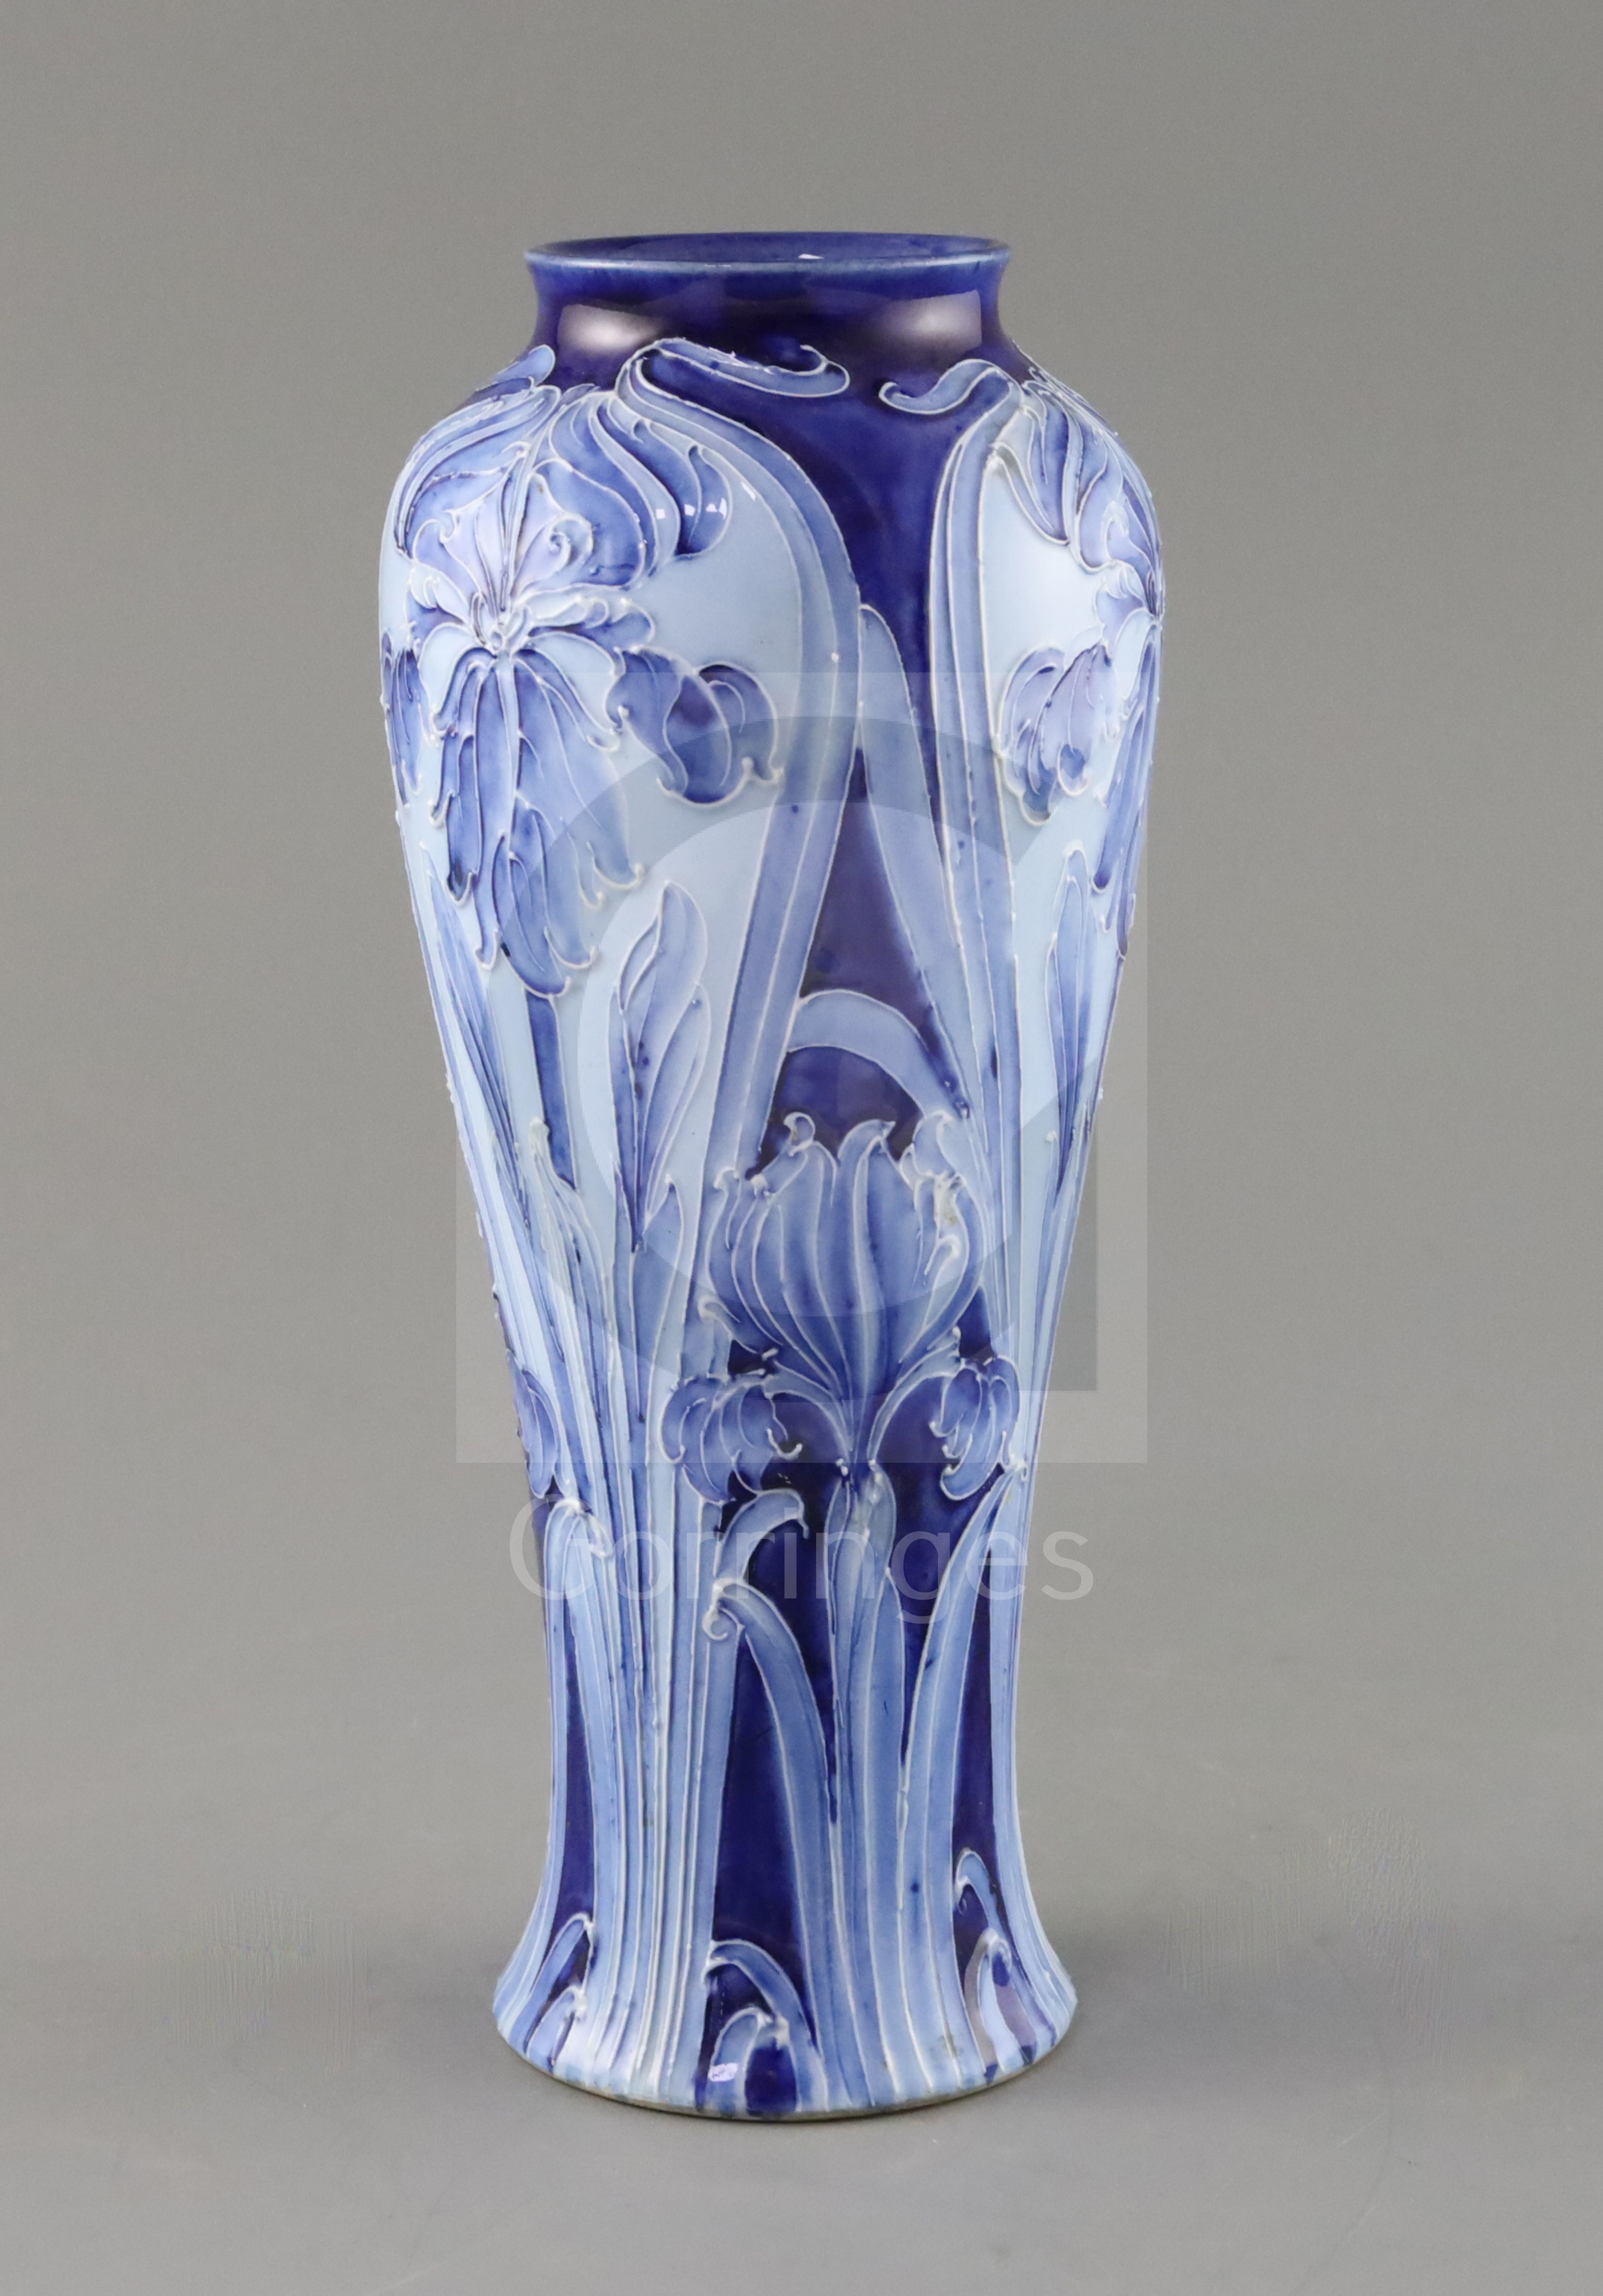 A Moorcroft Florian ware 'Iris' vase, c.1900, of tall baluster form, decorated in blue and white